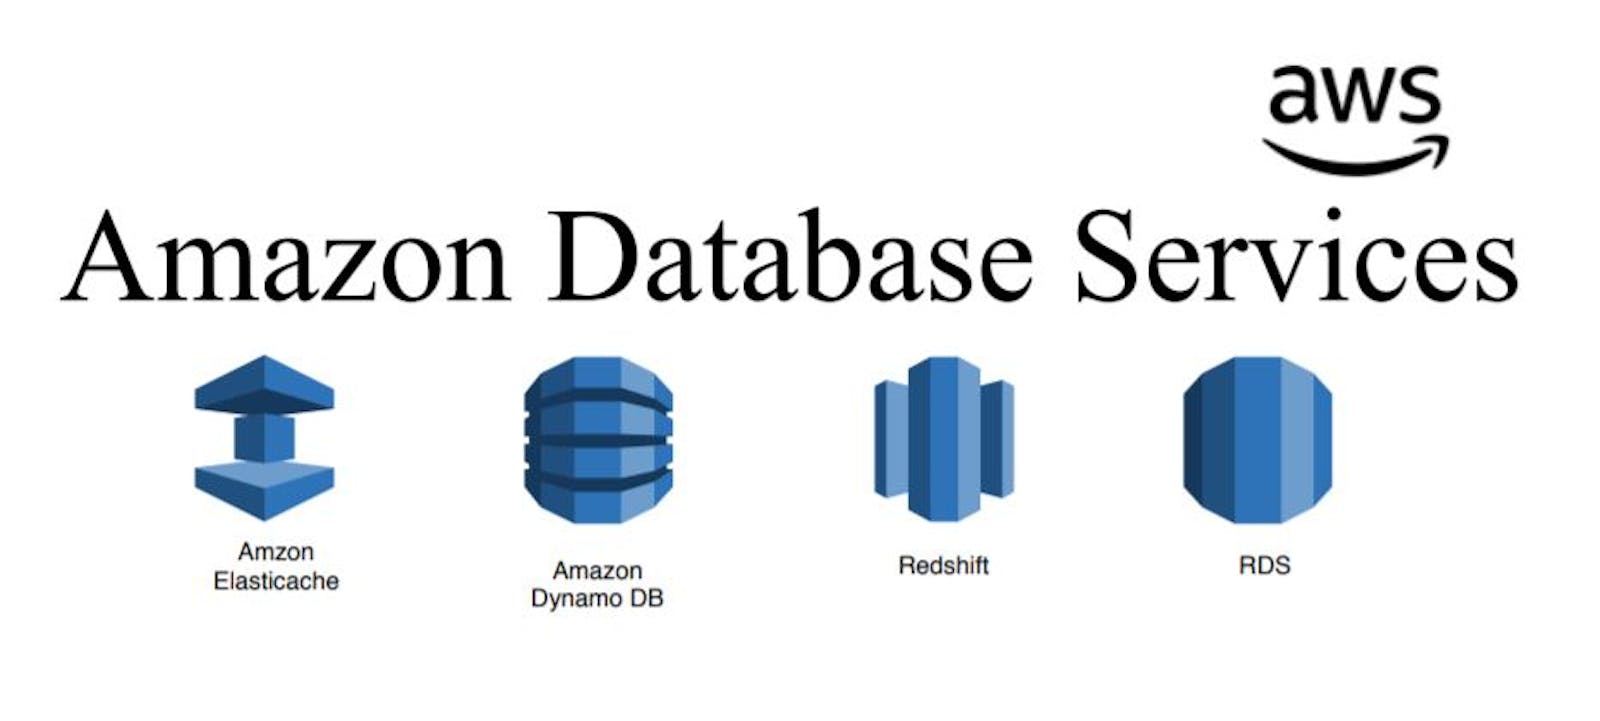 Day 42: Relational Database Service in AWS